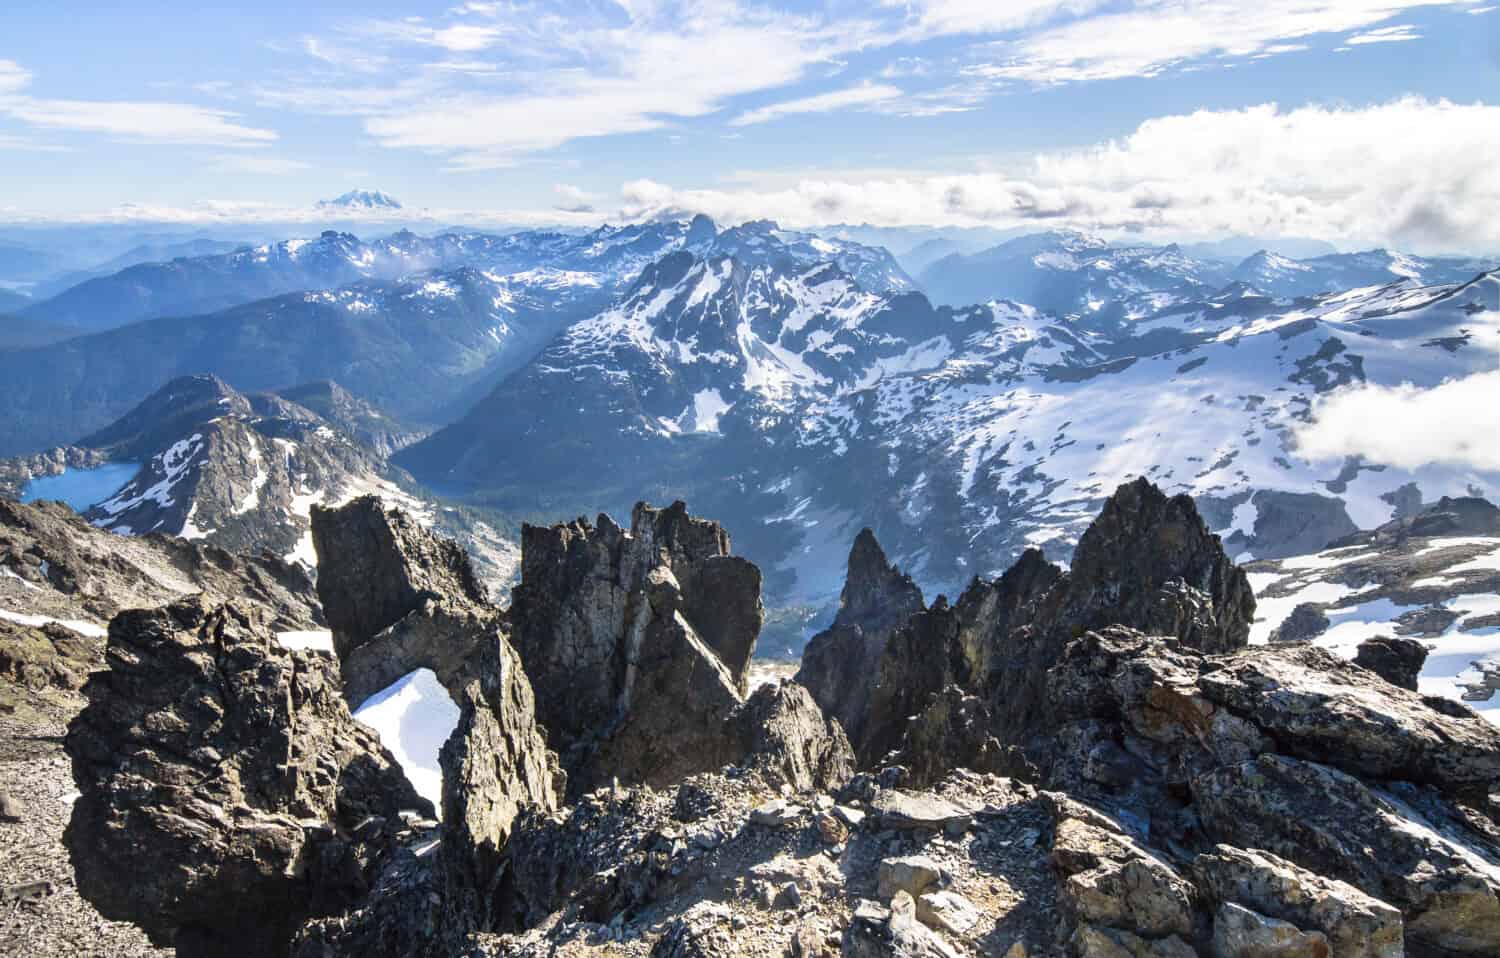 View from the summit of Mt. Daniel in the Alpine Lakes Wilderness, Washington